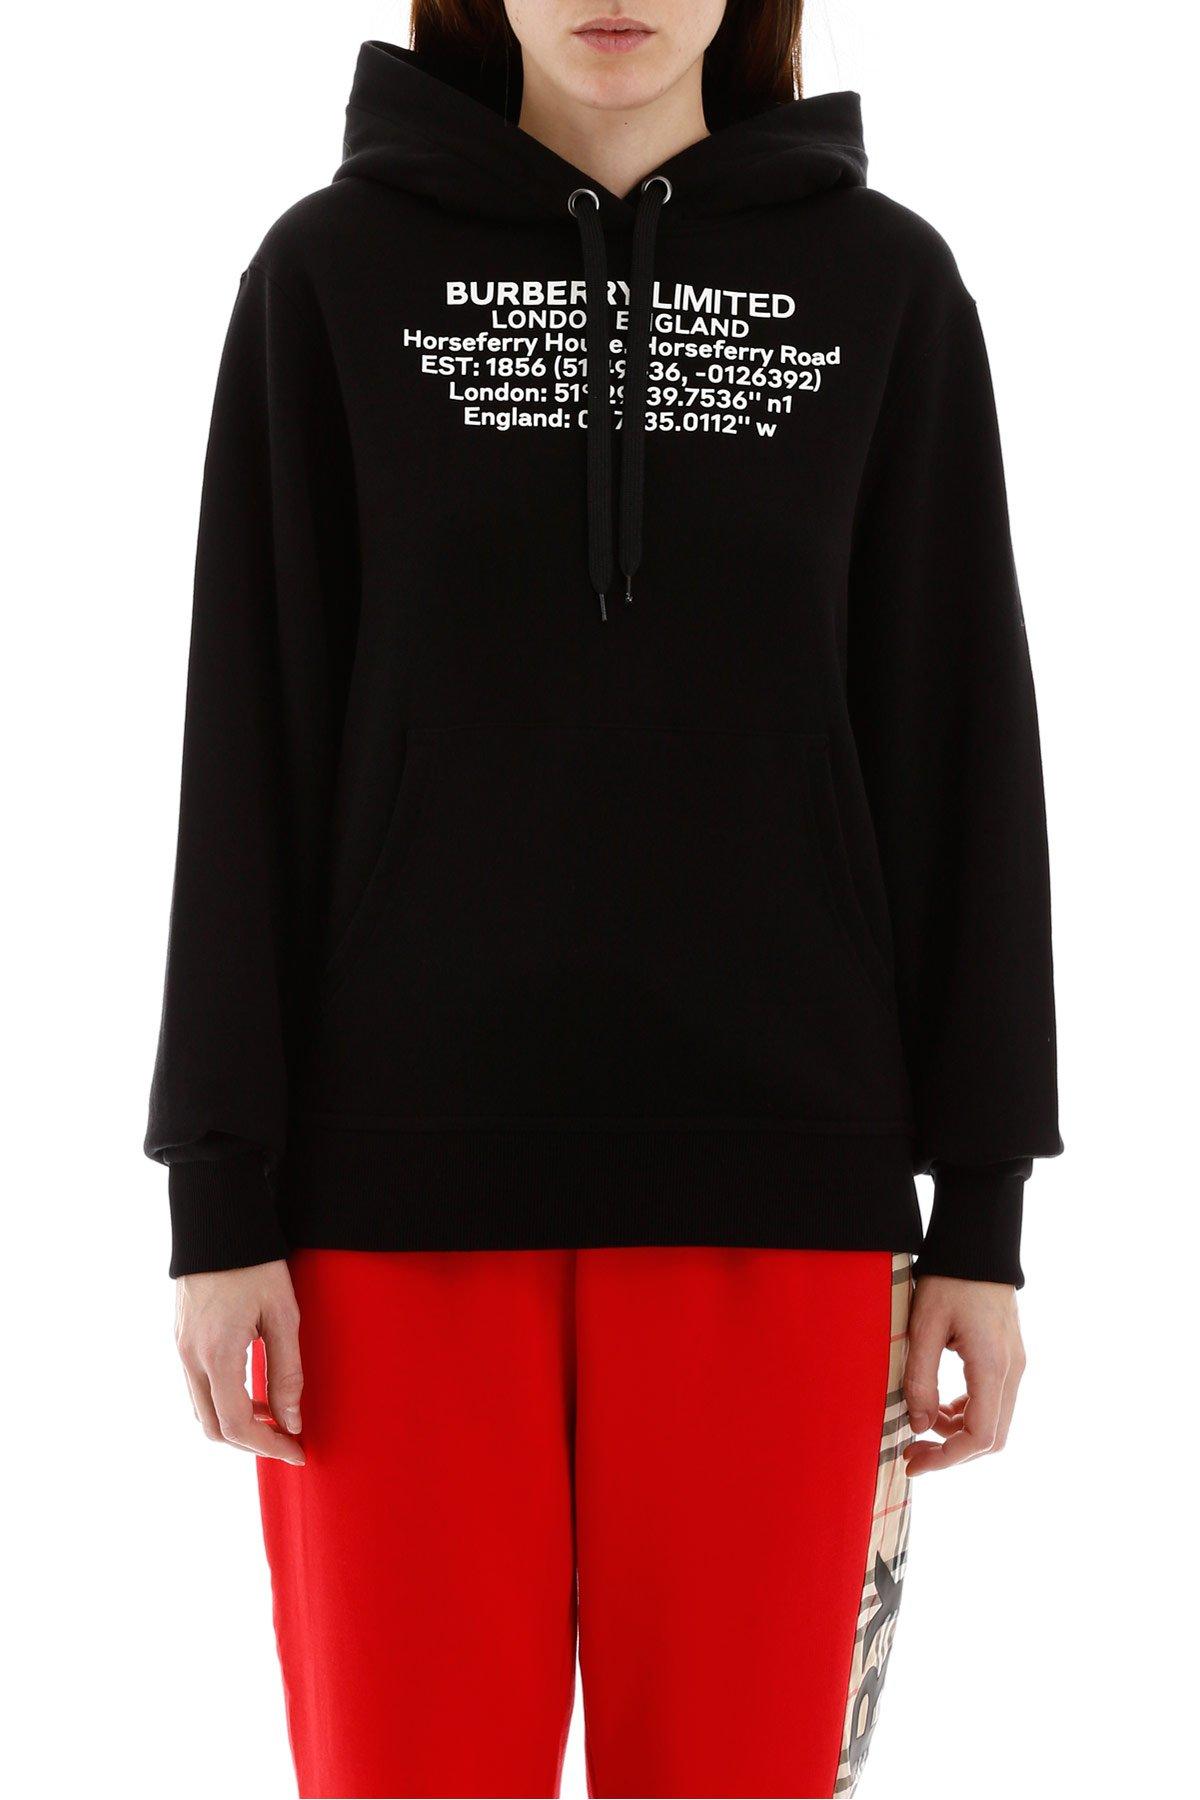 Burberry Cotton Poulter Hoodie With Coordinates in Black - Lyst